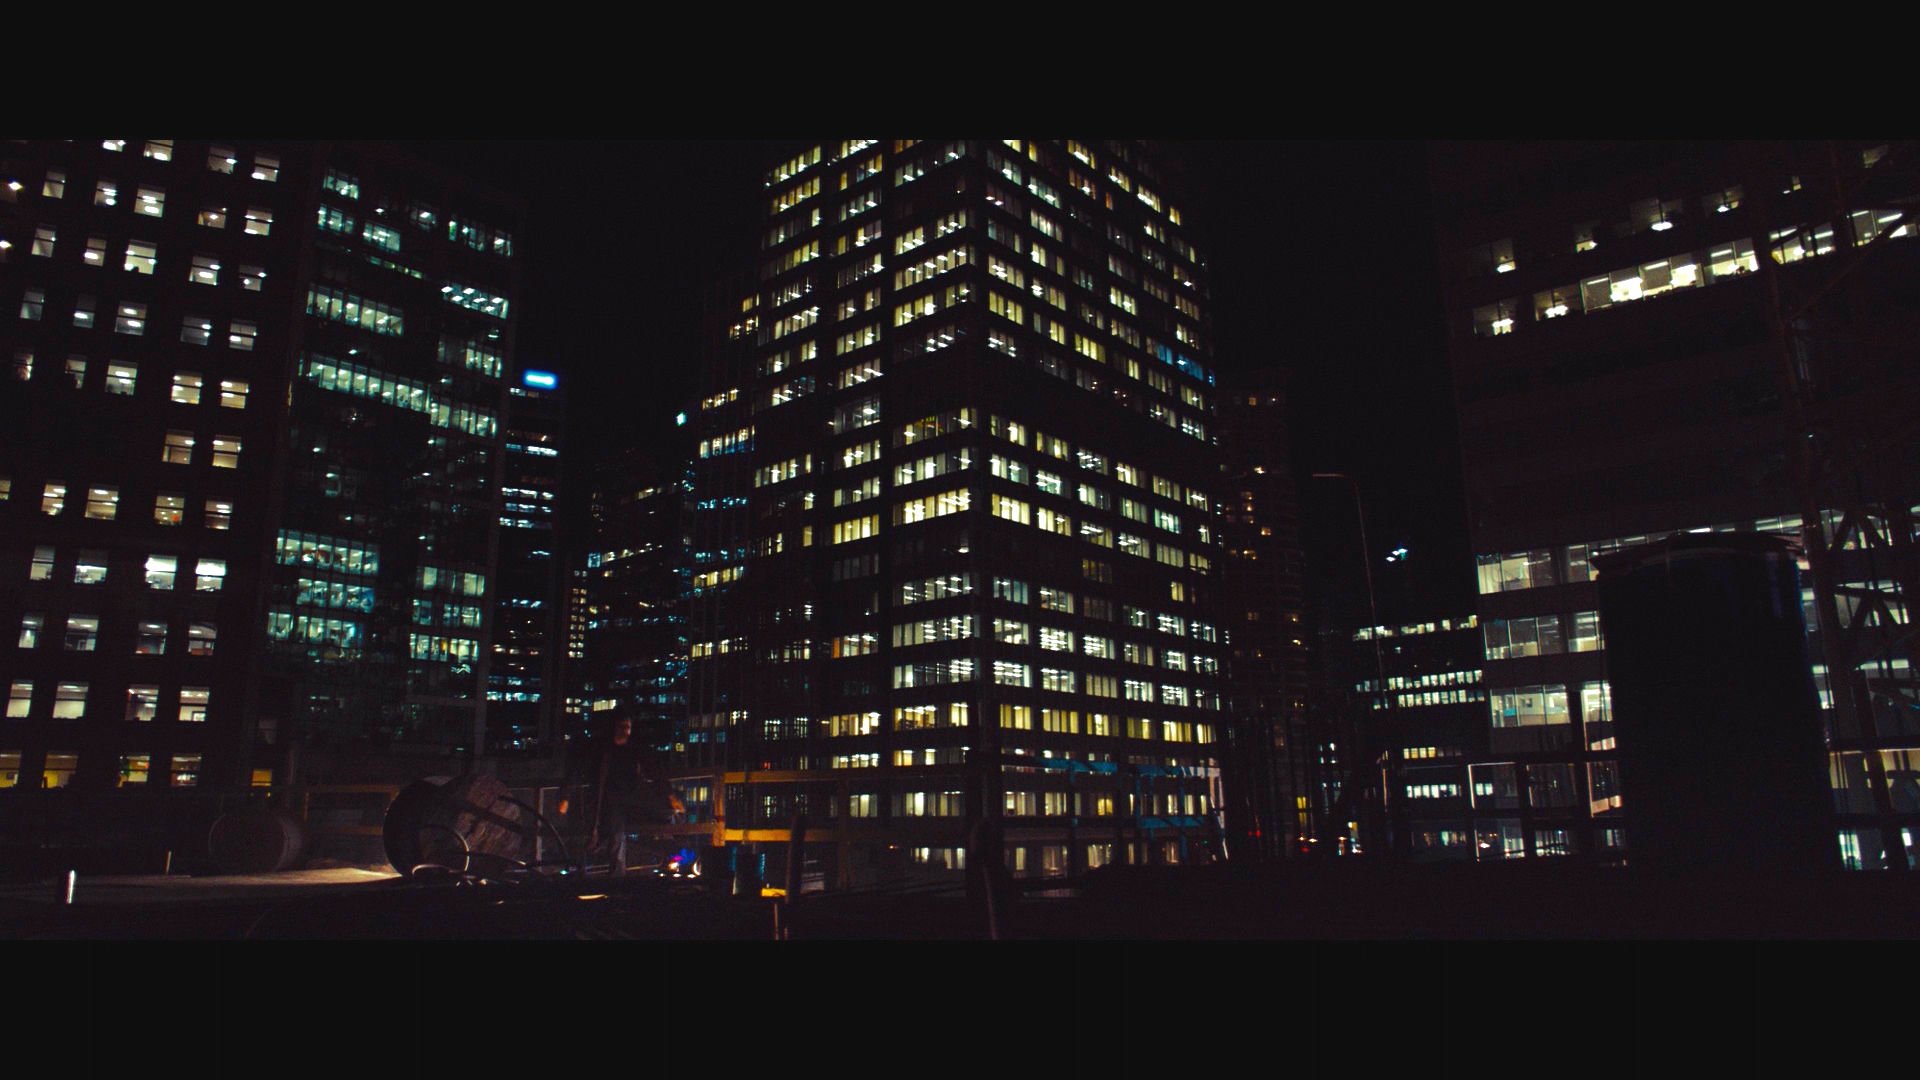 the, X files, Sci fi, Mystery, Drama, Television, Files, Series, Building, City, Night, Light Wallpaper